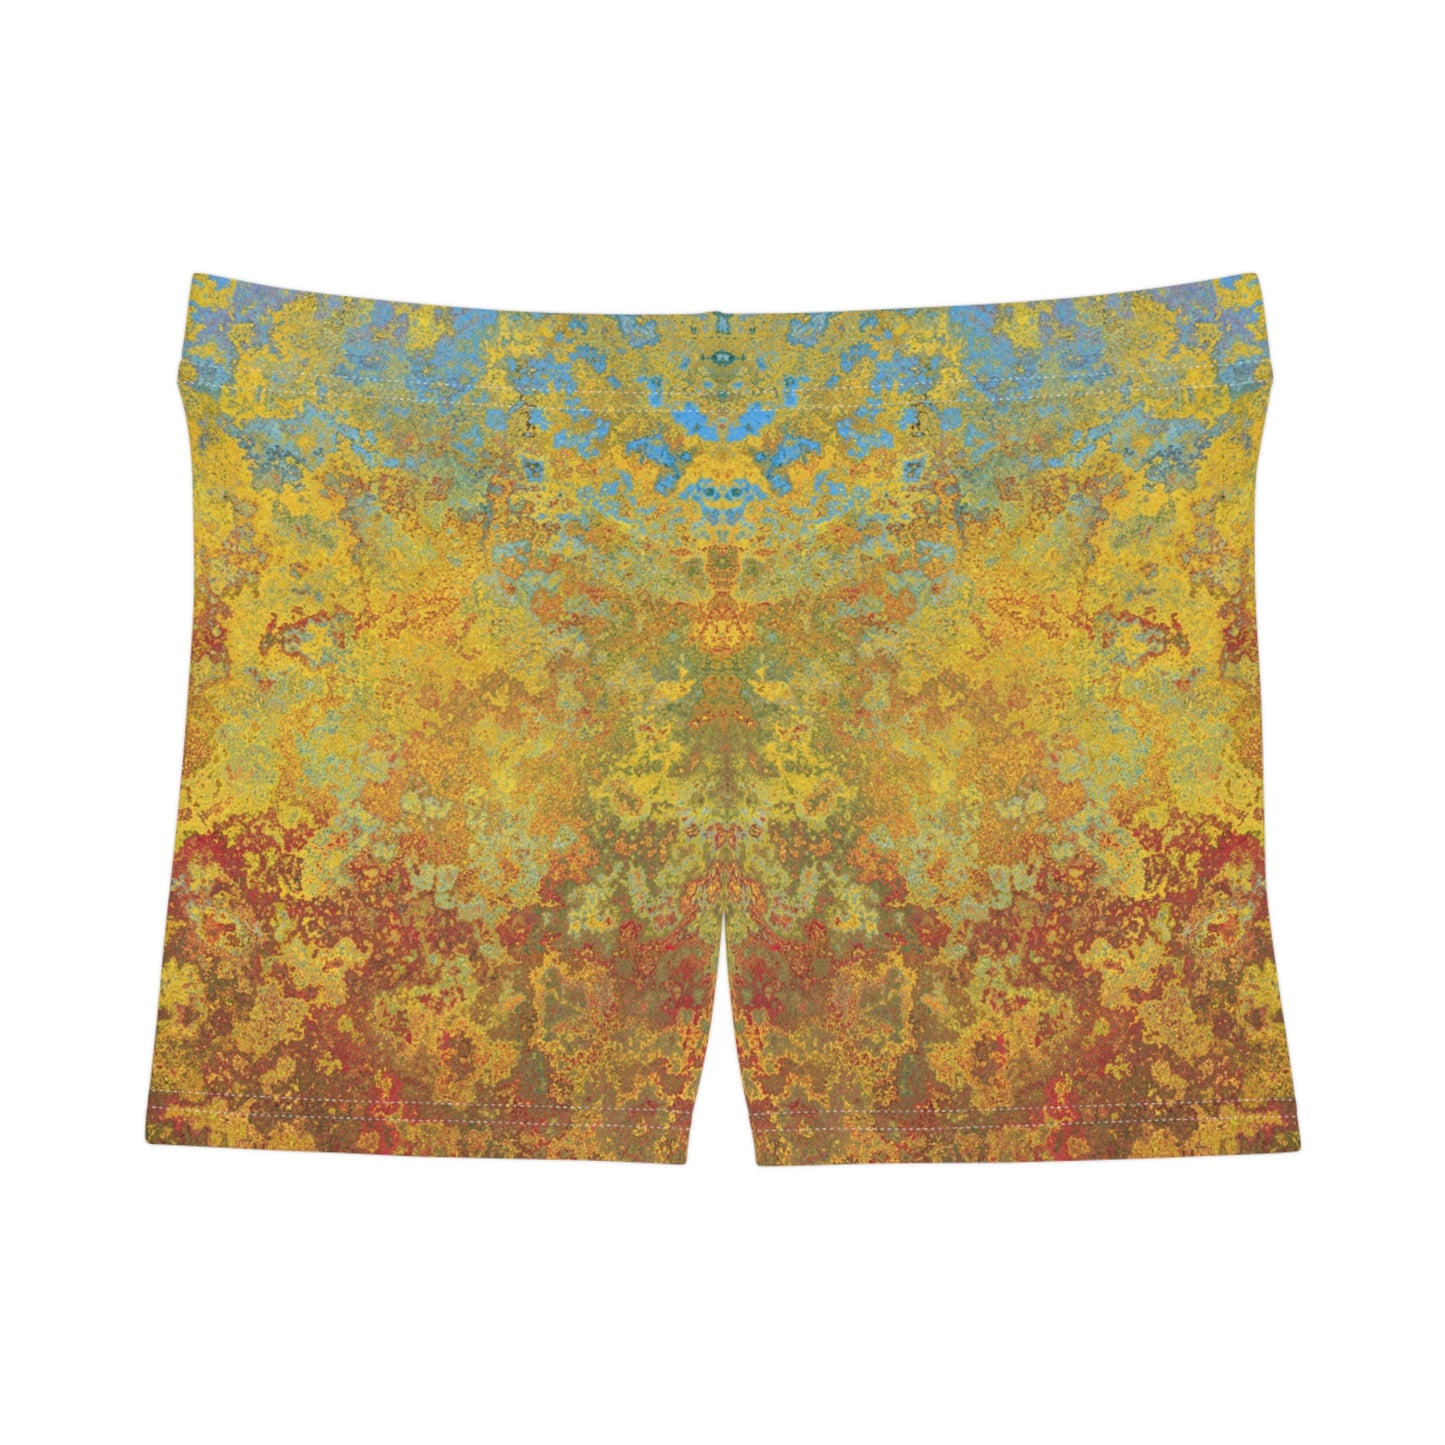 Gold and blue spots - Inovax Women's Shorts